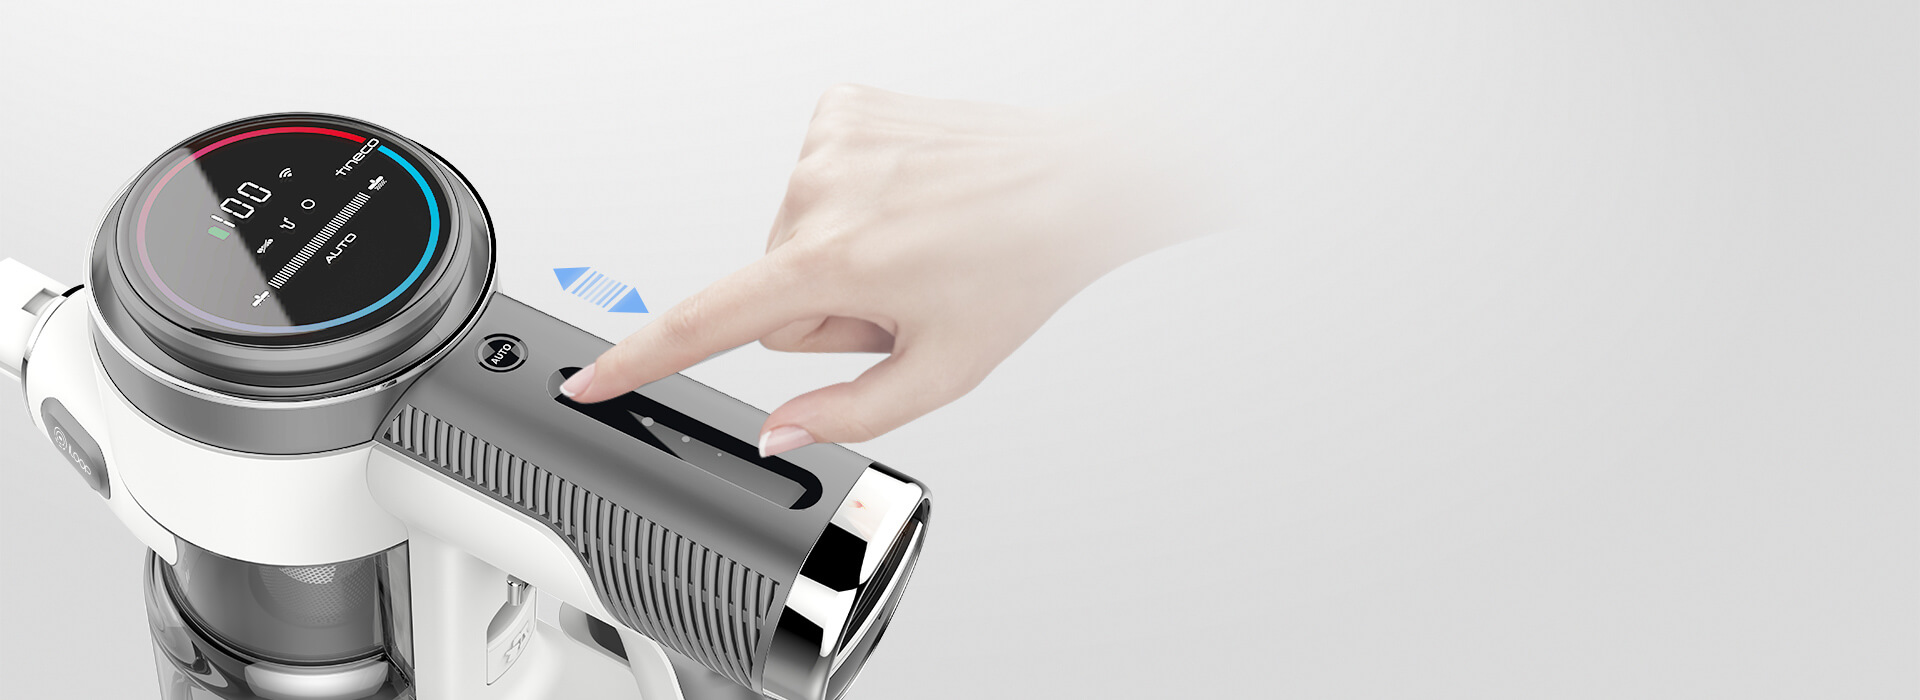 Suction Power Control at Your Fingertips